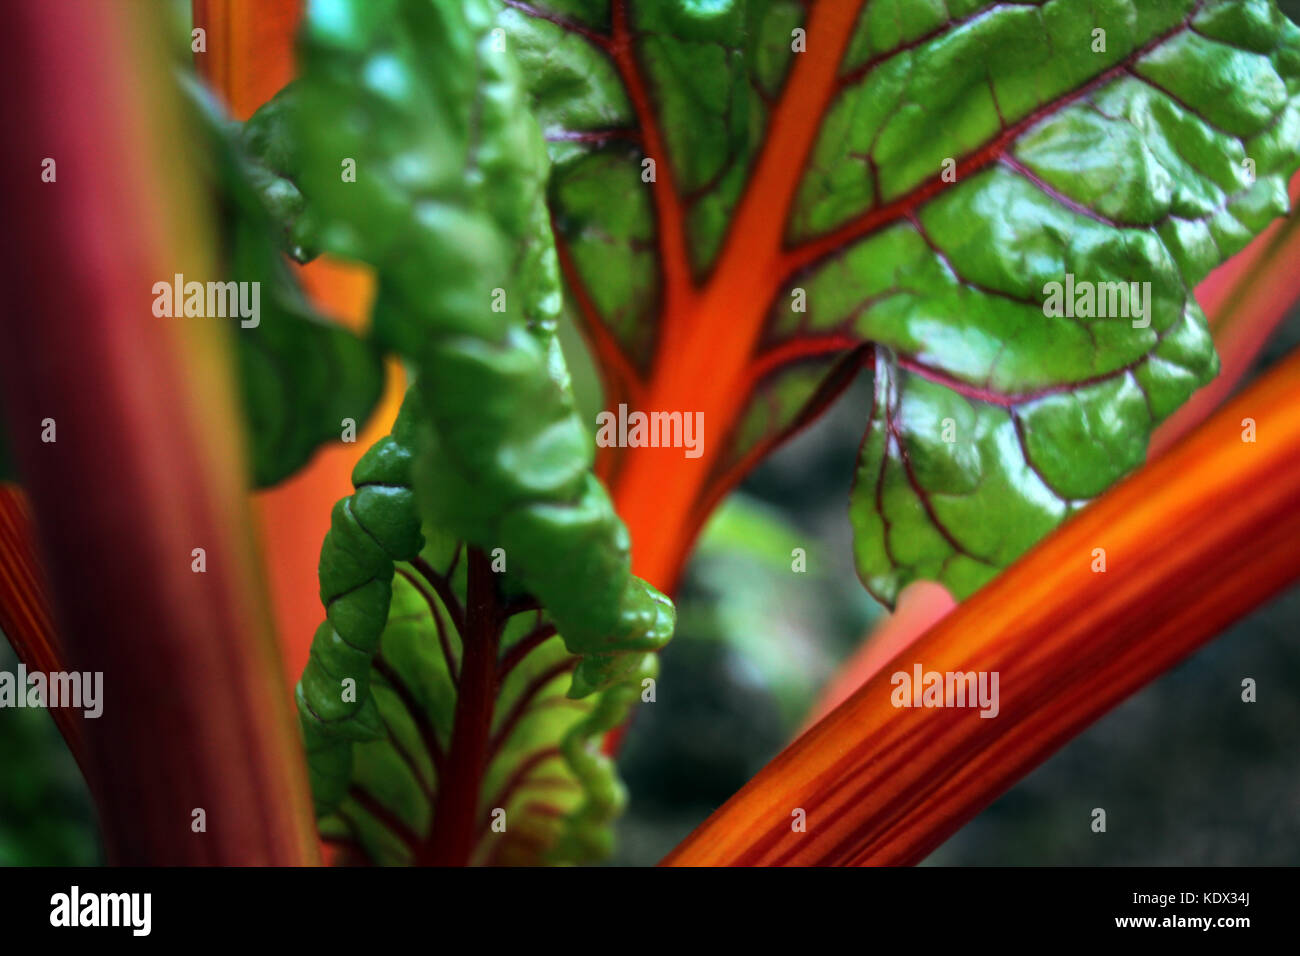 Swiss chard with red stalks and green leaves growing in a vegetable garden Stock Photo